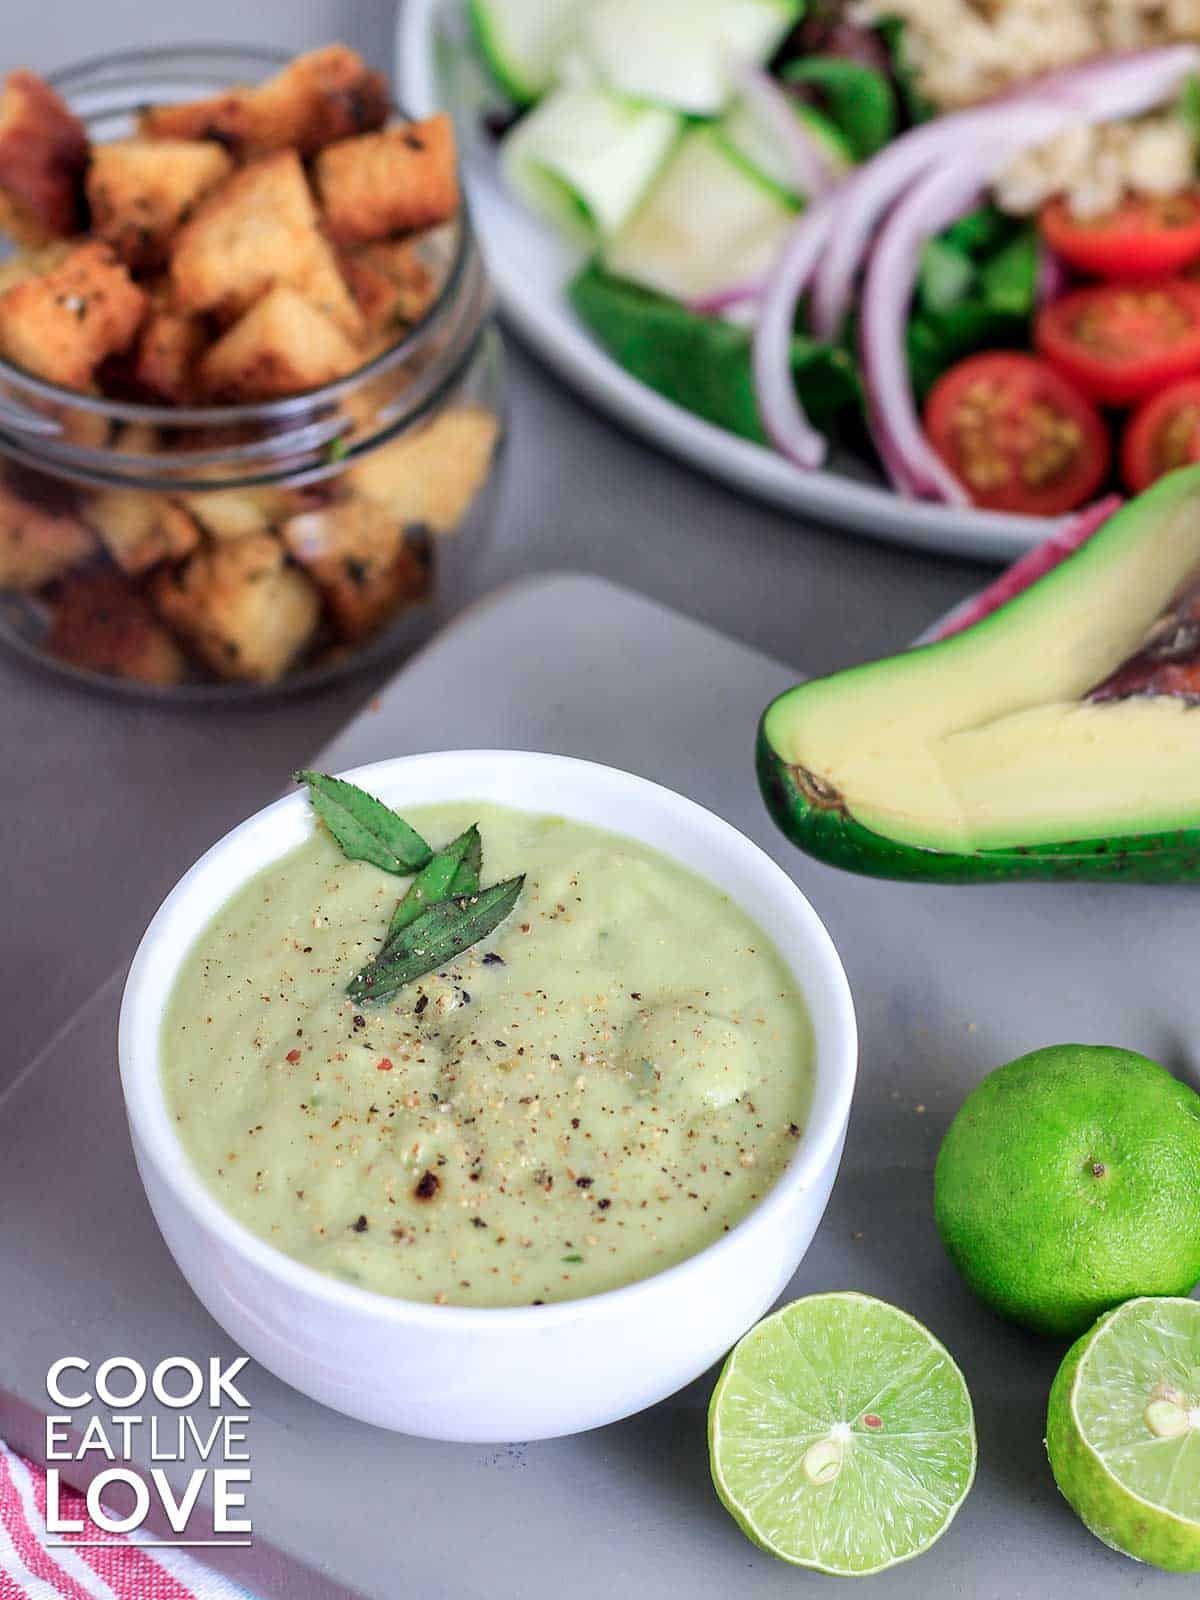 Avocado lime dressing served up in small white bowl with herb garnish and limes